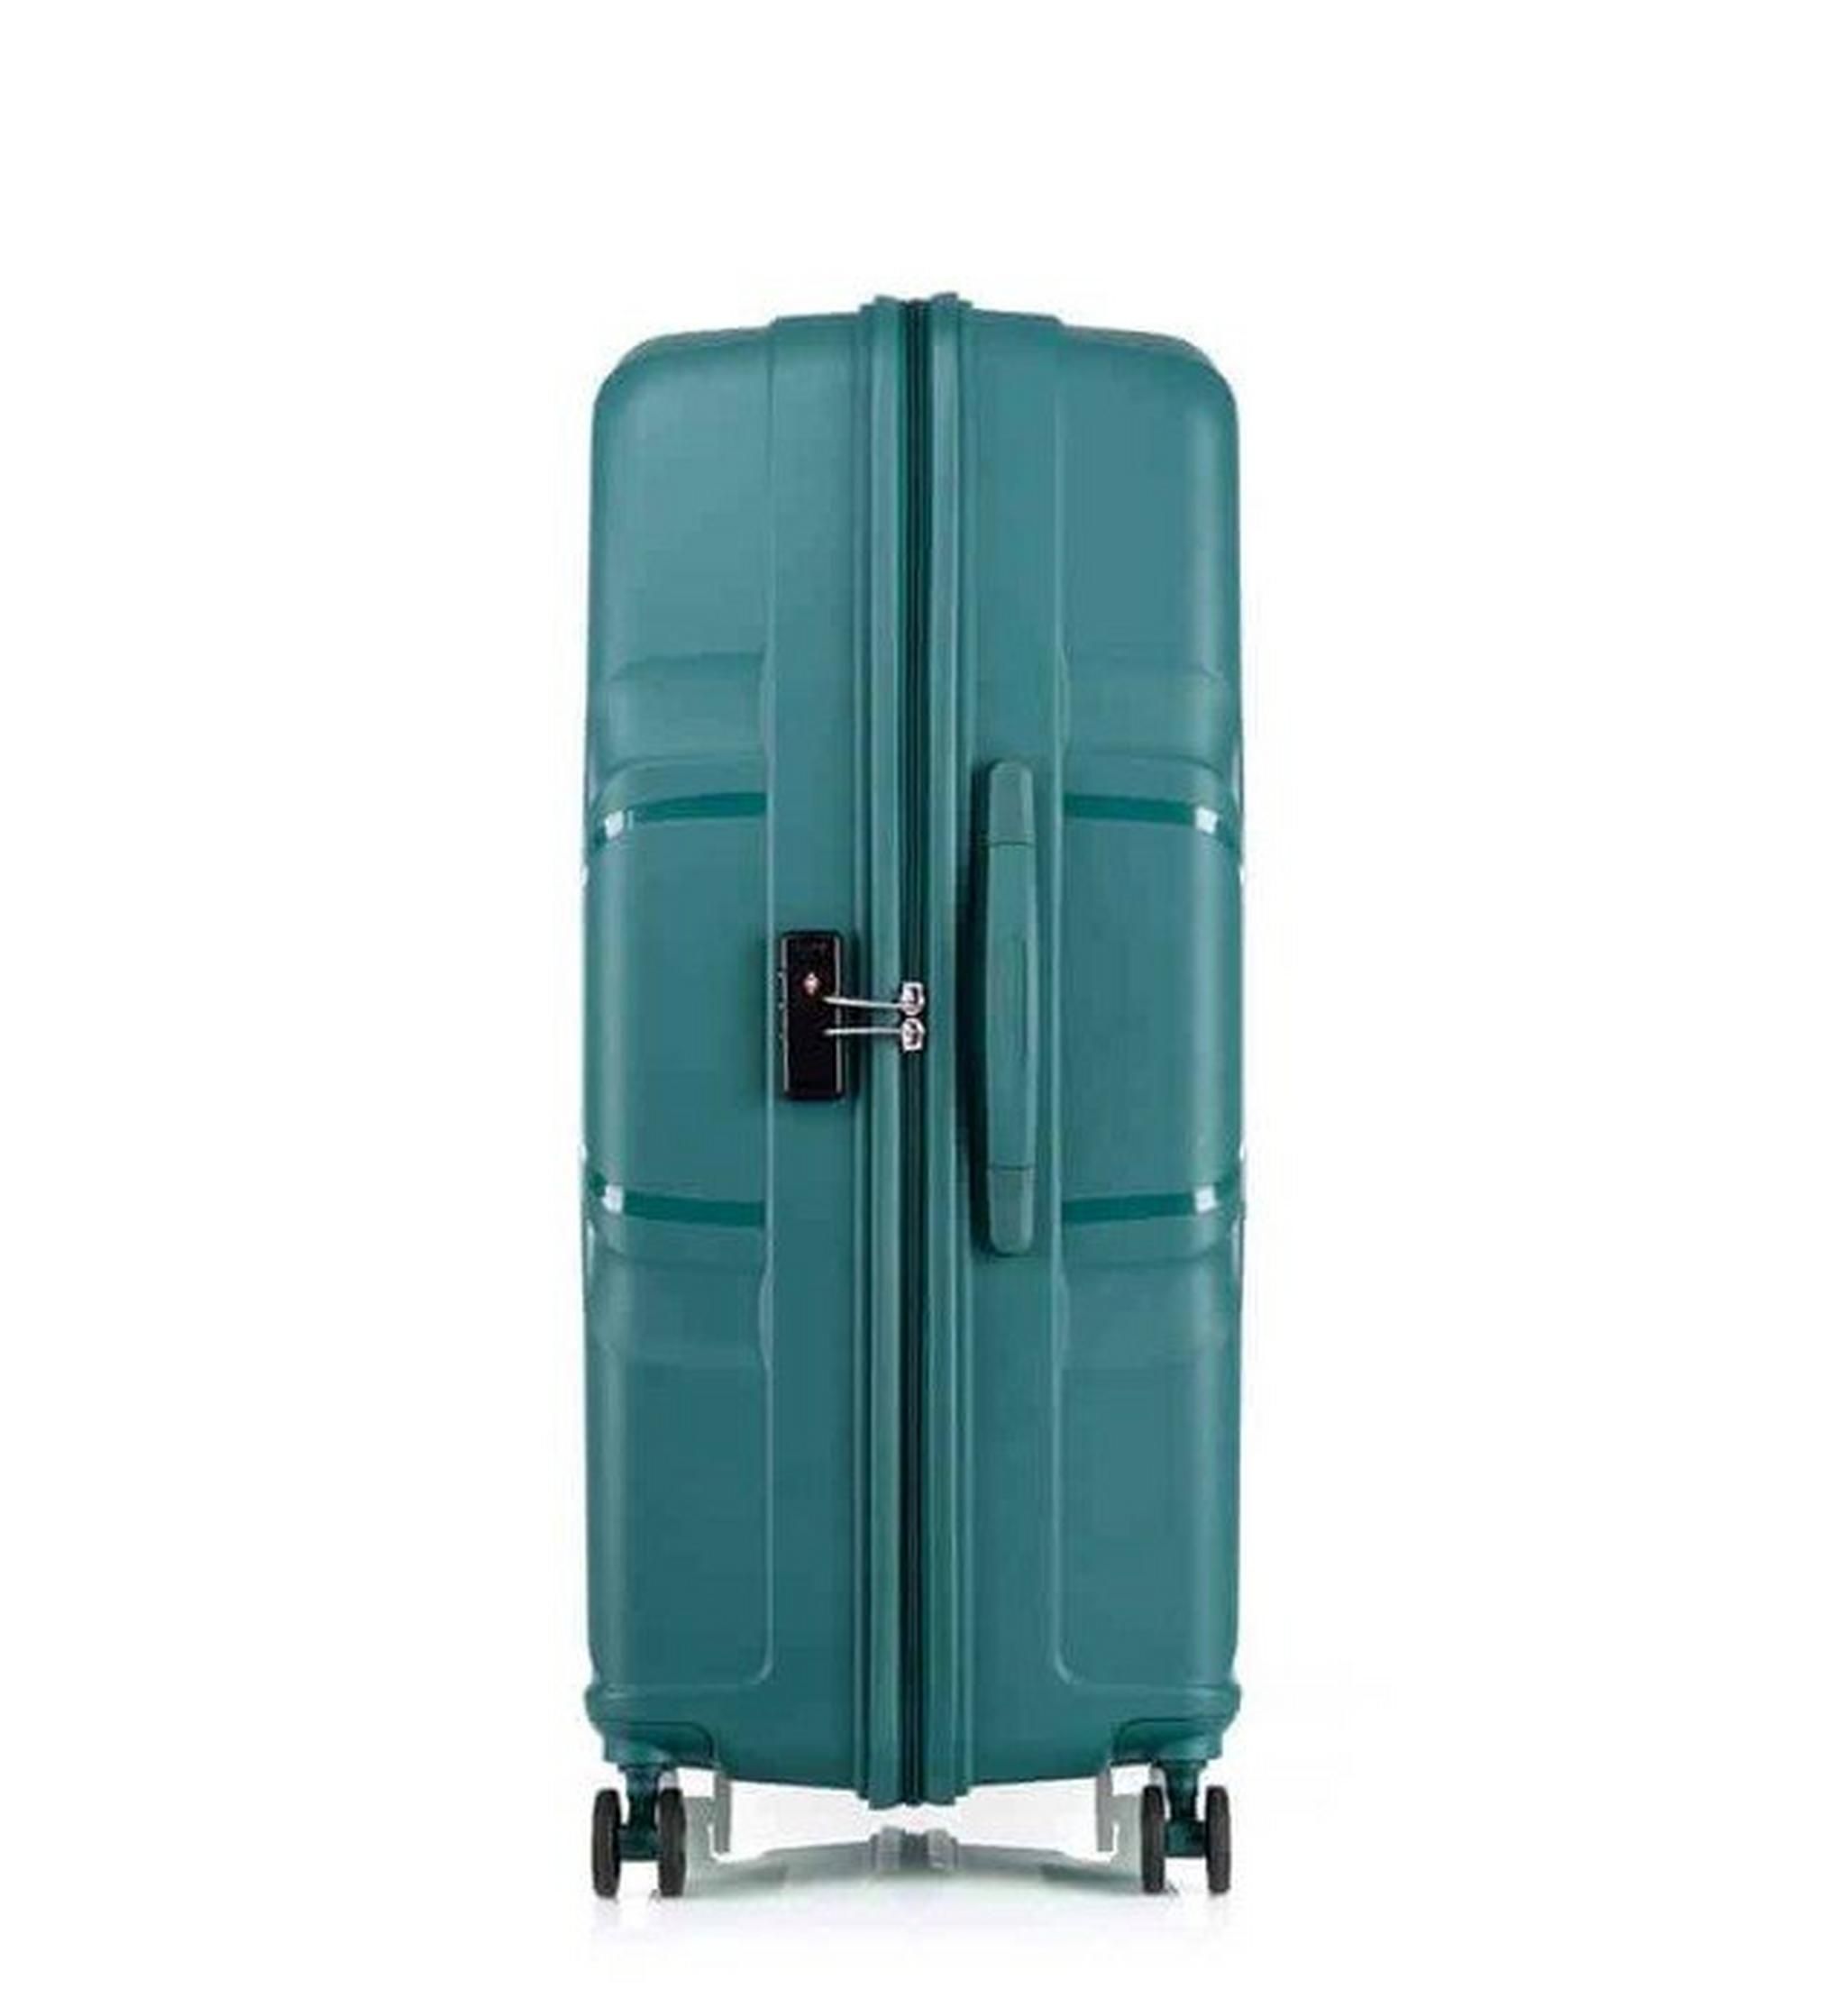 American Tourister Kross Hard Side Spinner Luggage, 55/20 cm, LE2X34101– Spring Green